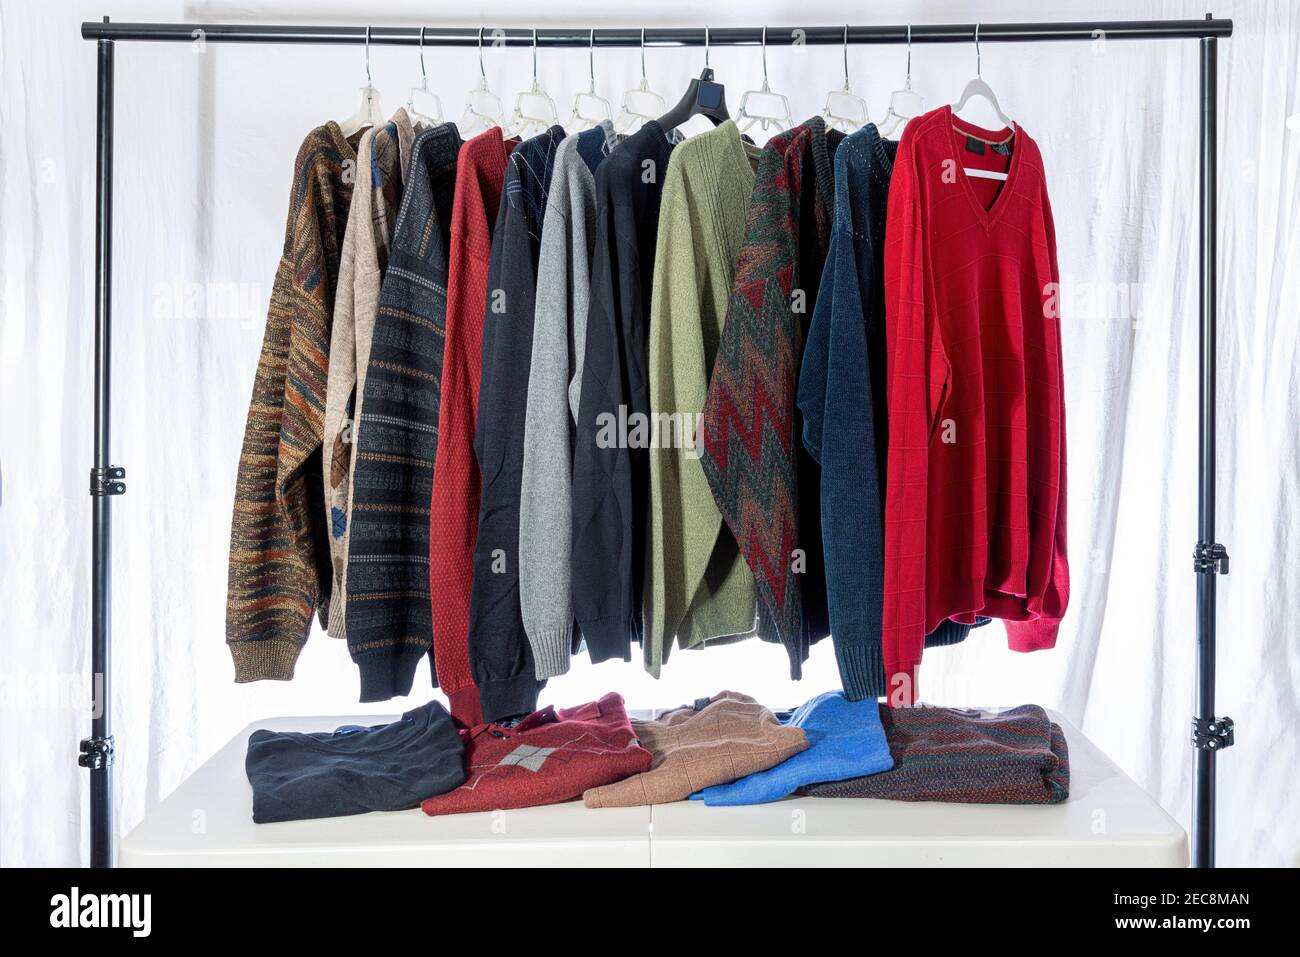 Horizontal shot of a group of men’s sweaters displayed at an estate sale or garage sale. Stock Photo